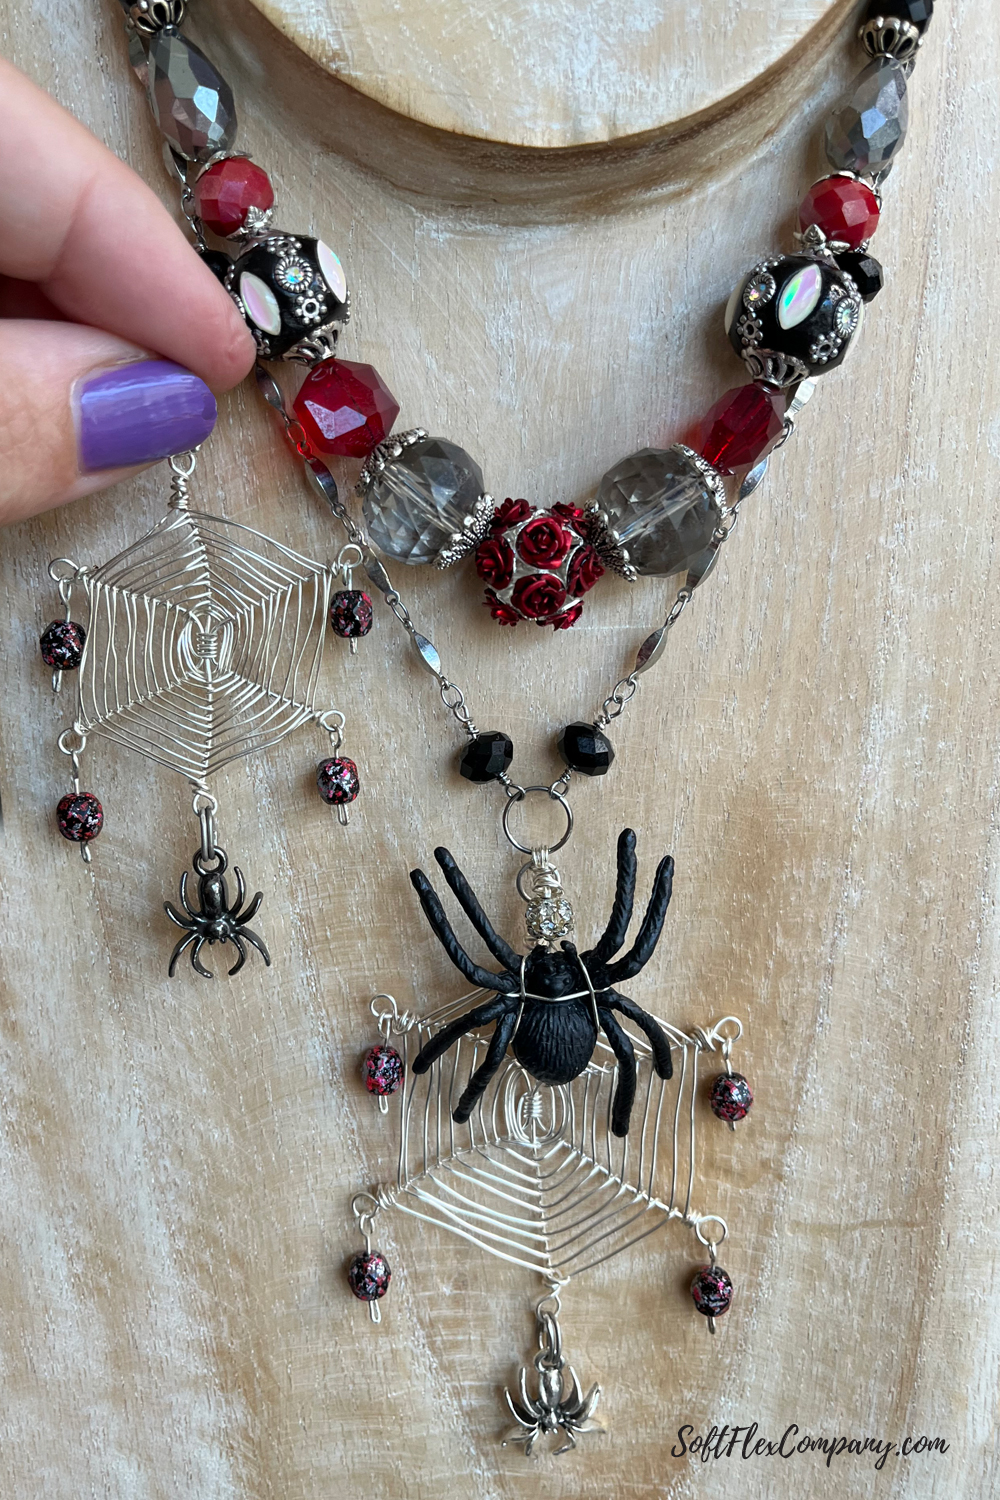 Spider Web Earrings and Pendant Necklace by Kristen Fagan